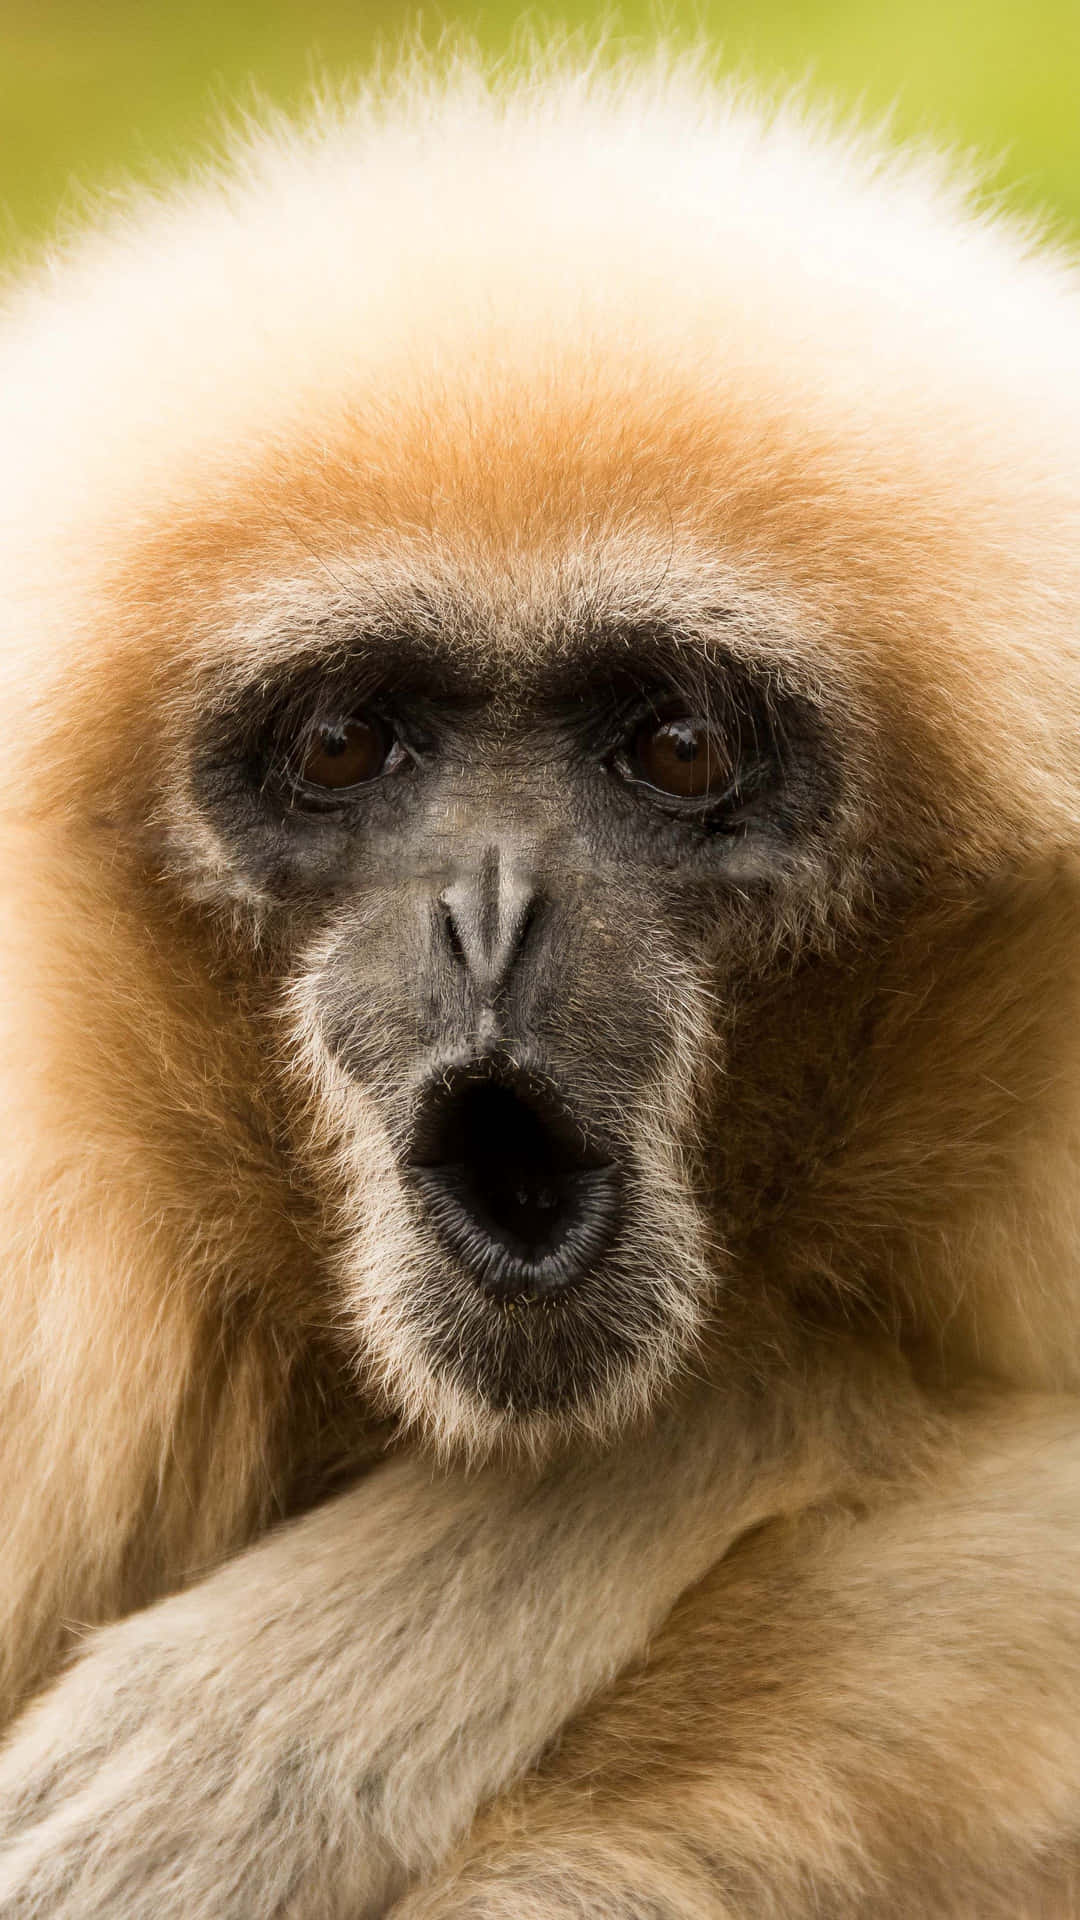 Funny Yellow Gibbon Close Up Background